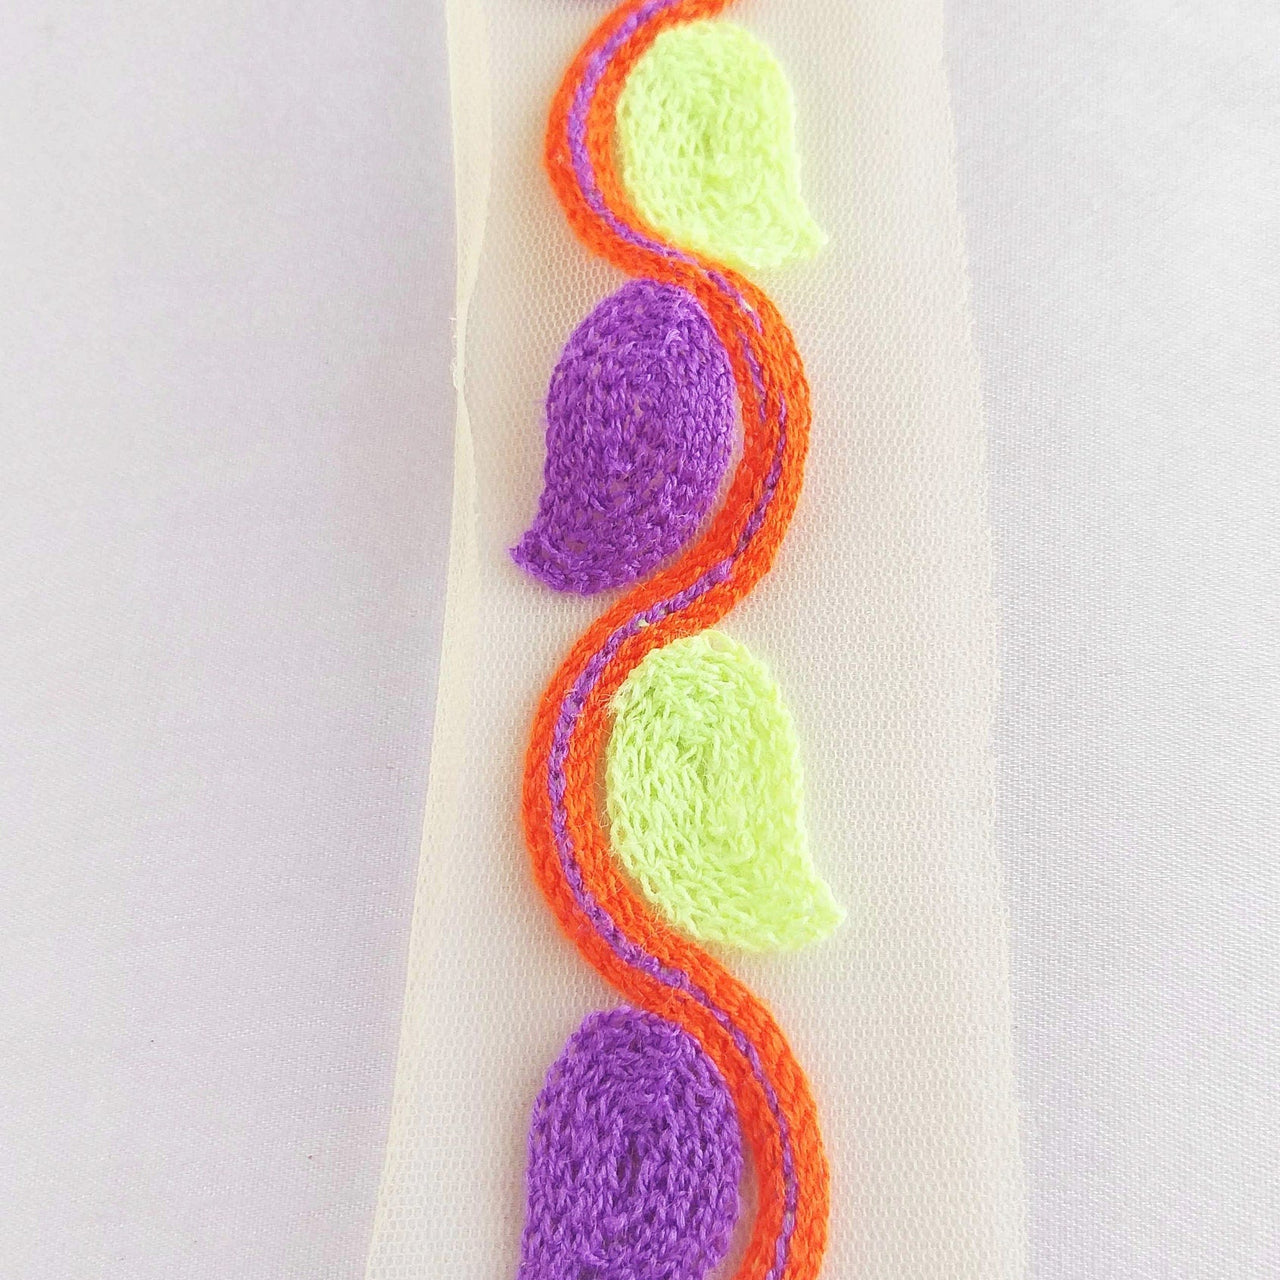 Beige Net With Green, Purple And Orange Embroidery, Leaves Pattern Trim